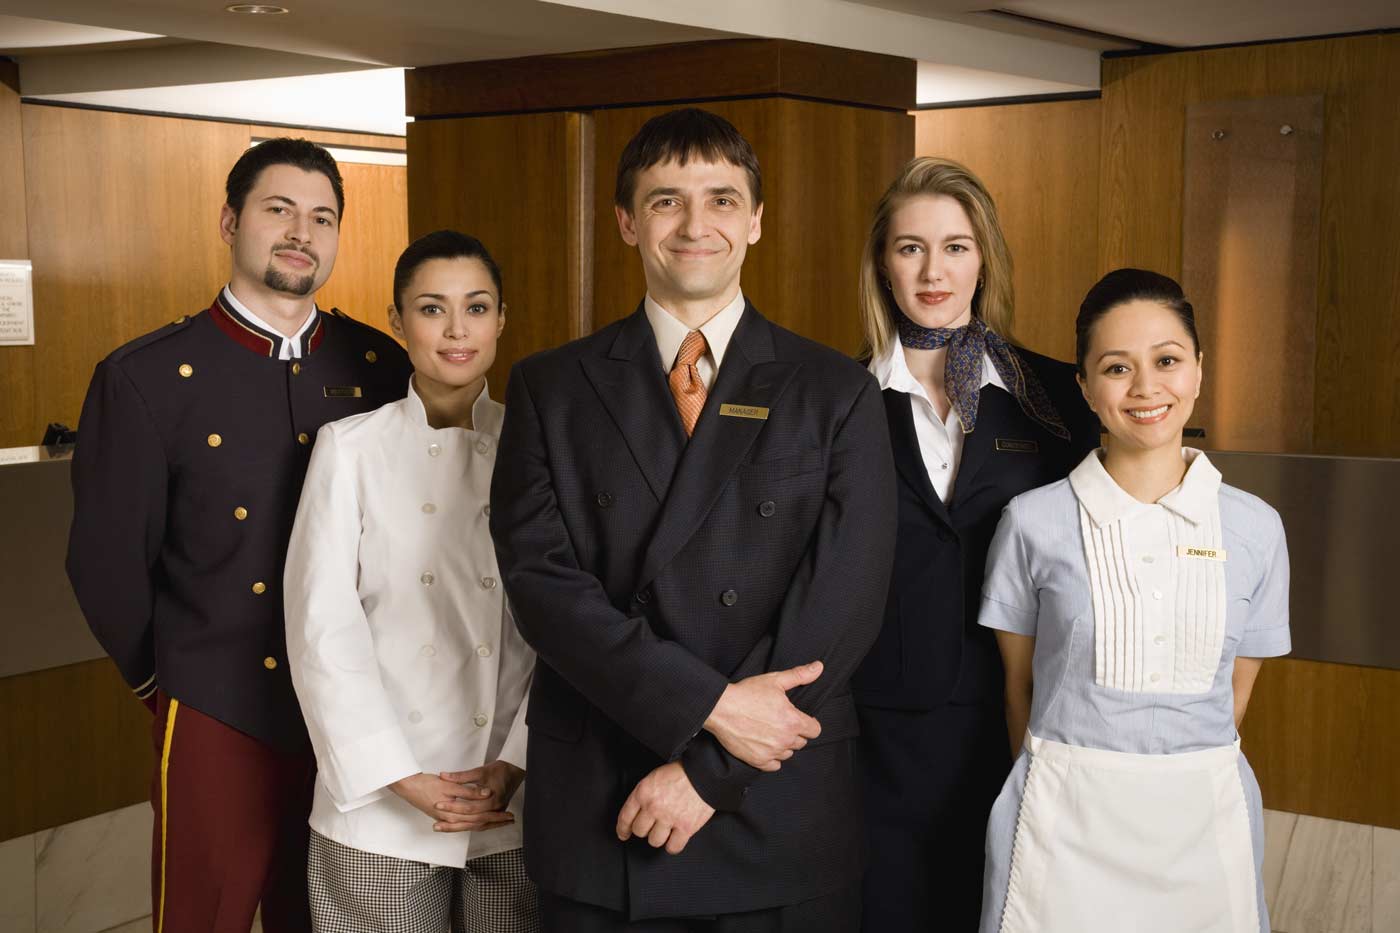 How To Instill A Hotel Customer Service Culture In All Hotels